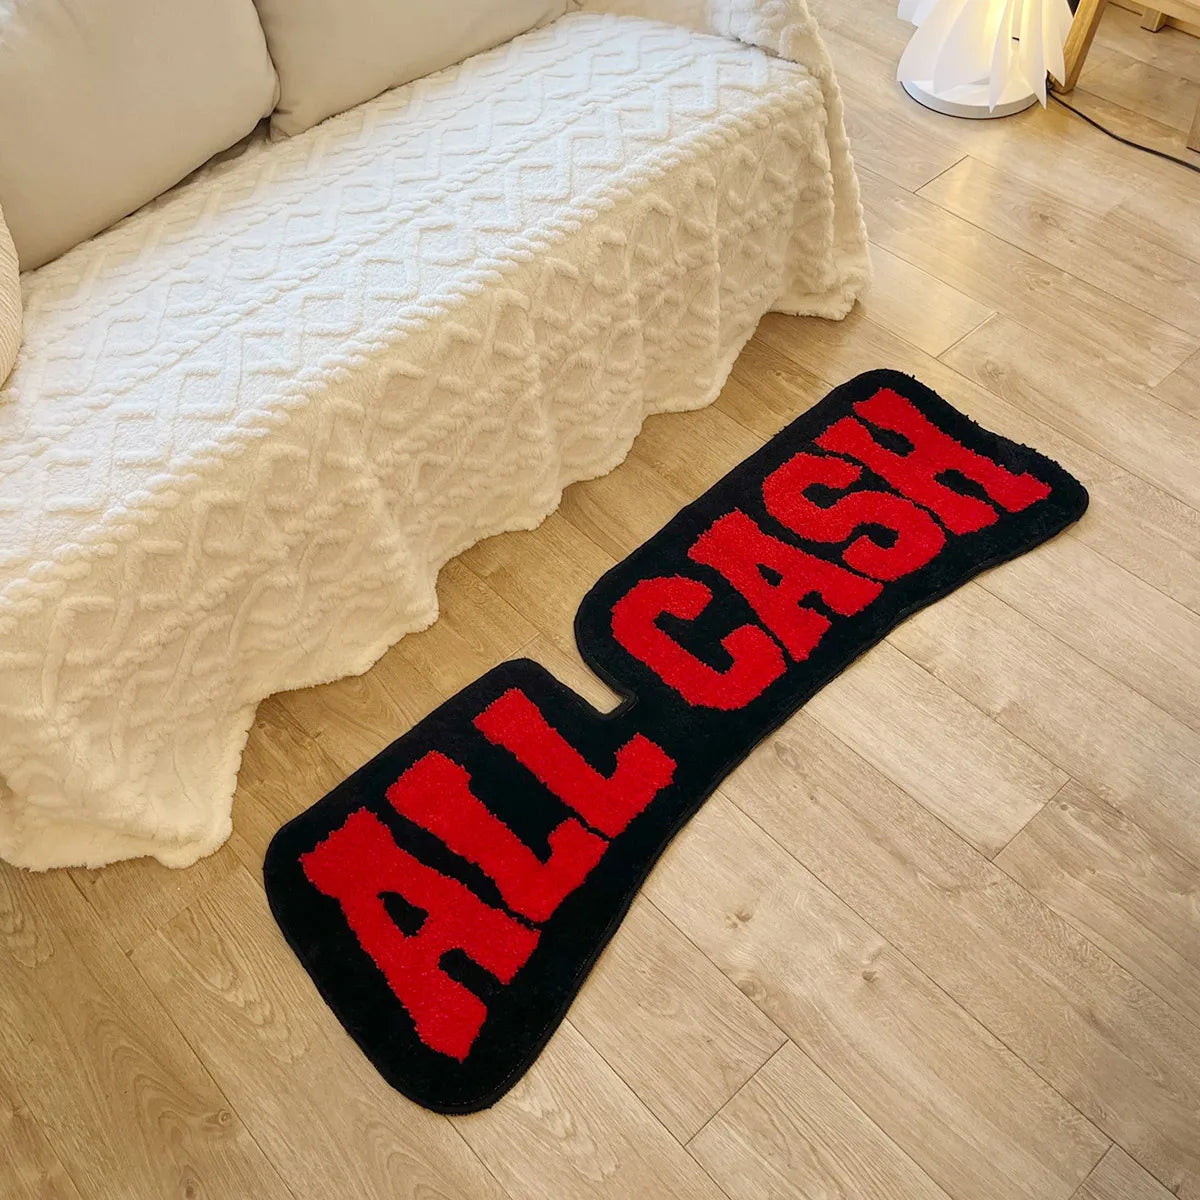 All Cash 3D Tufted Rug - Cool Purple Mat for Teen Room Decor